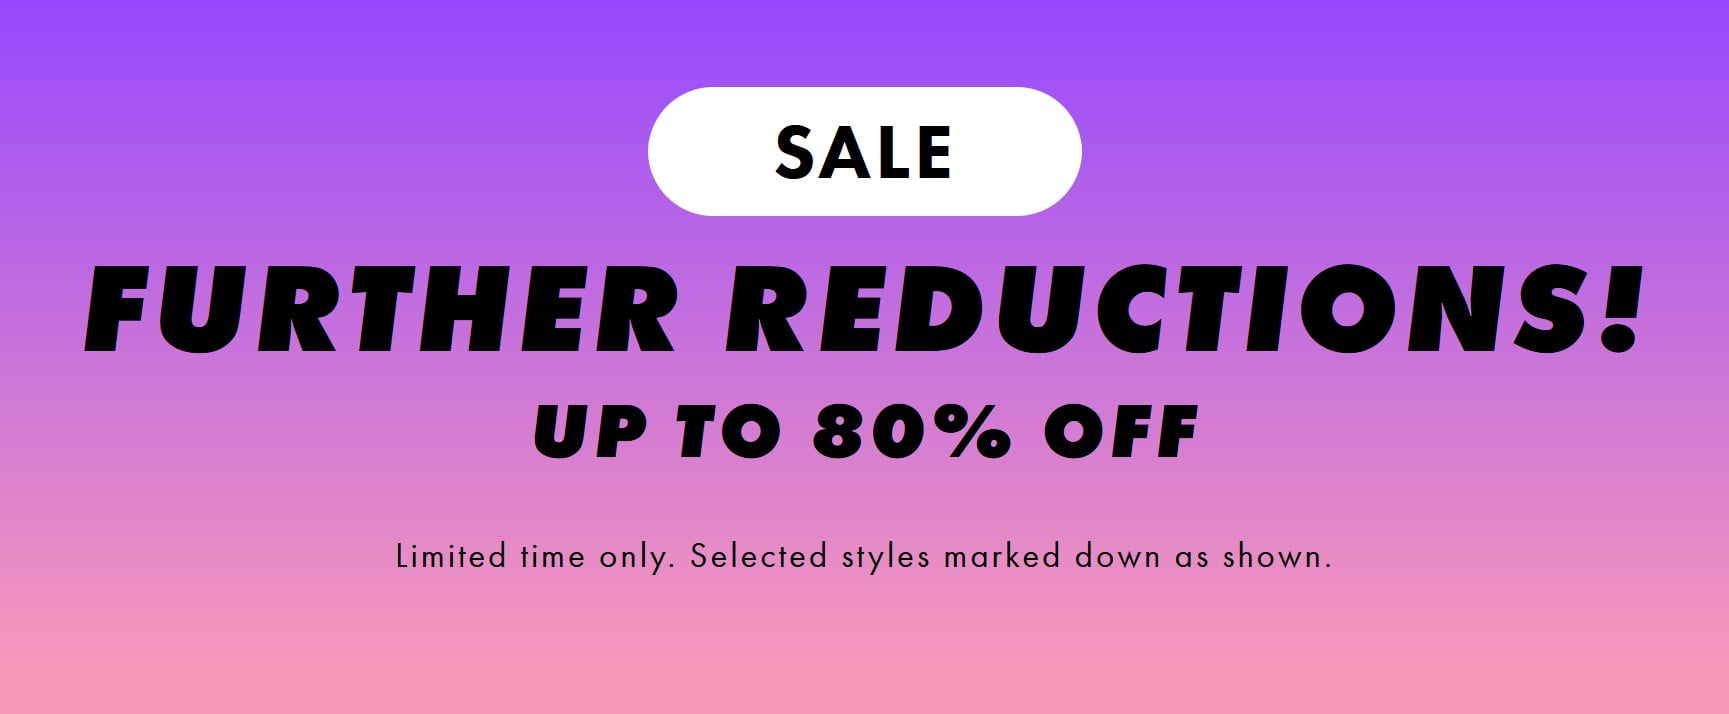 Offers at ASOS